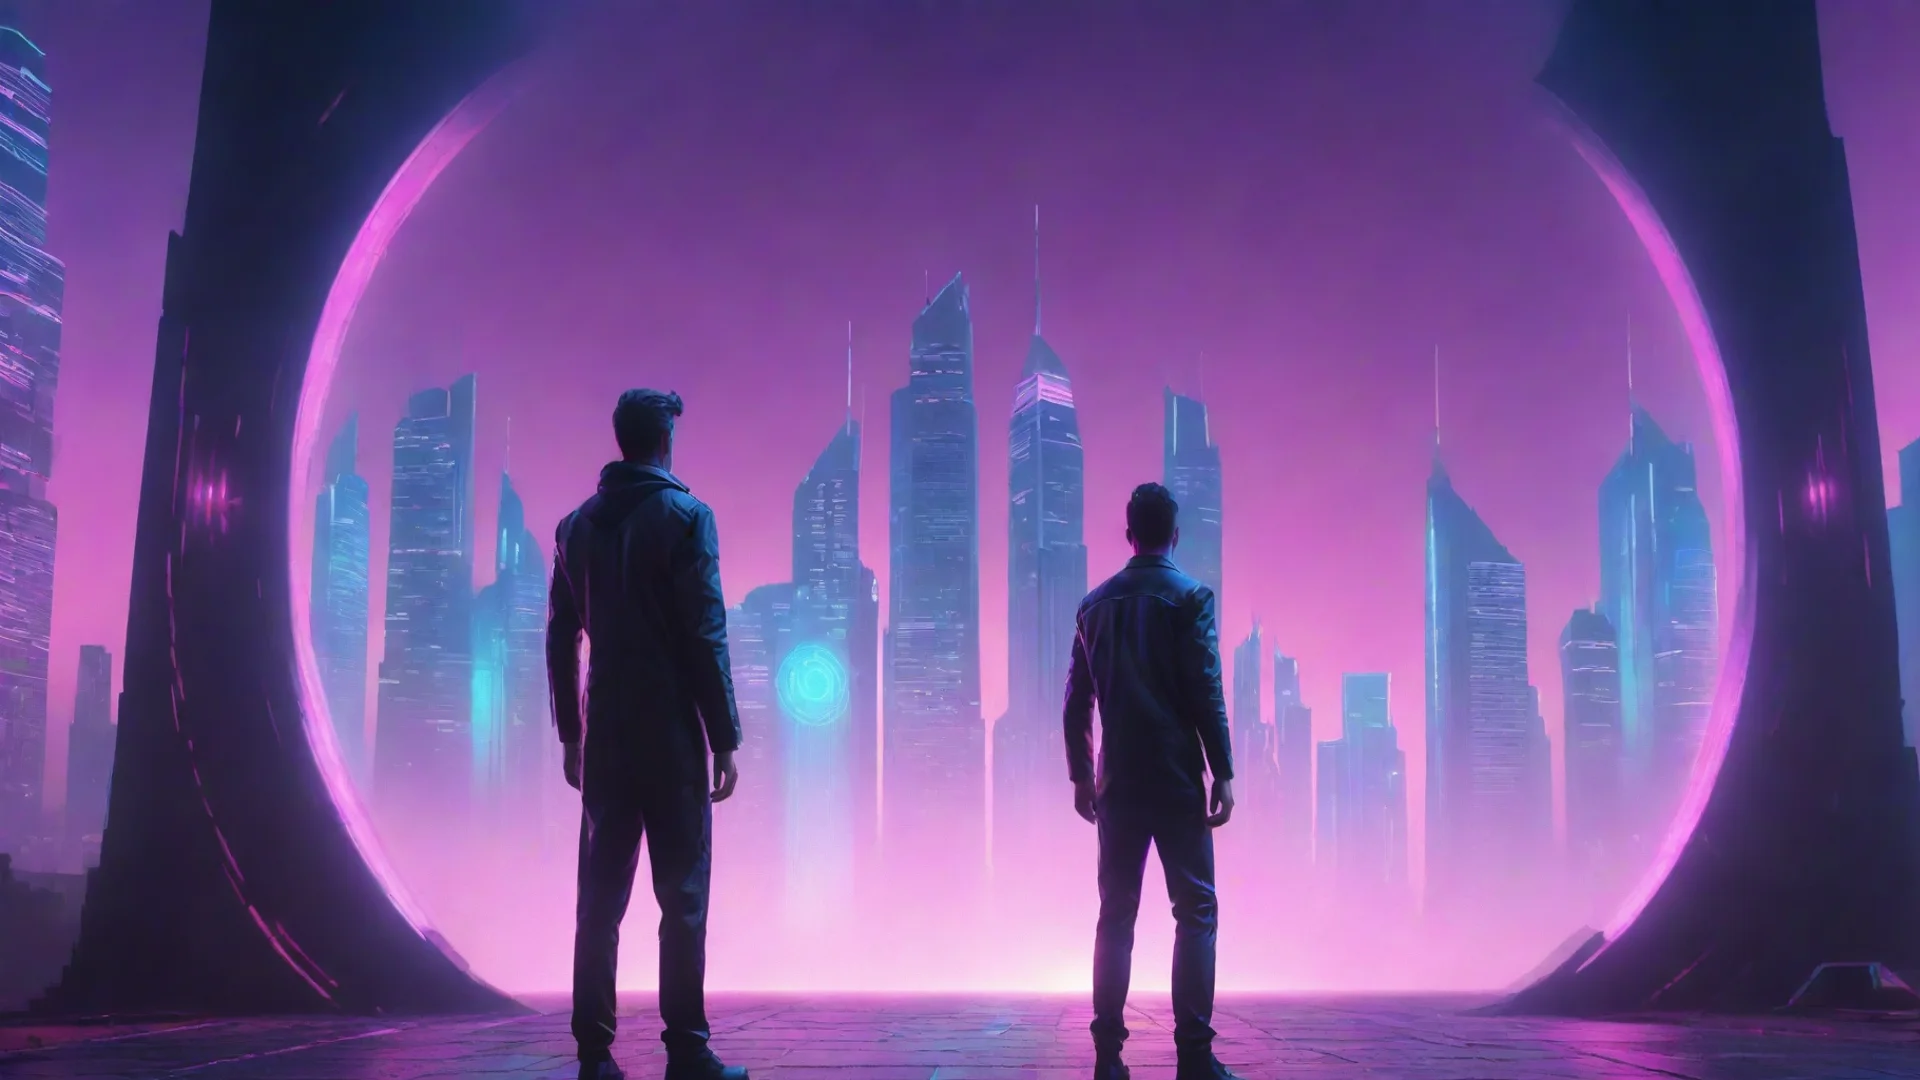 amazing synthwave of a man standing behind the portal of the futuristic city awesome portrait 2 wide